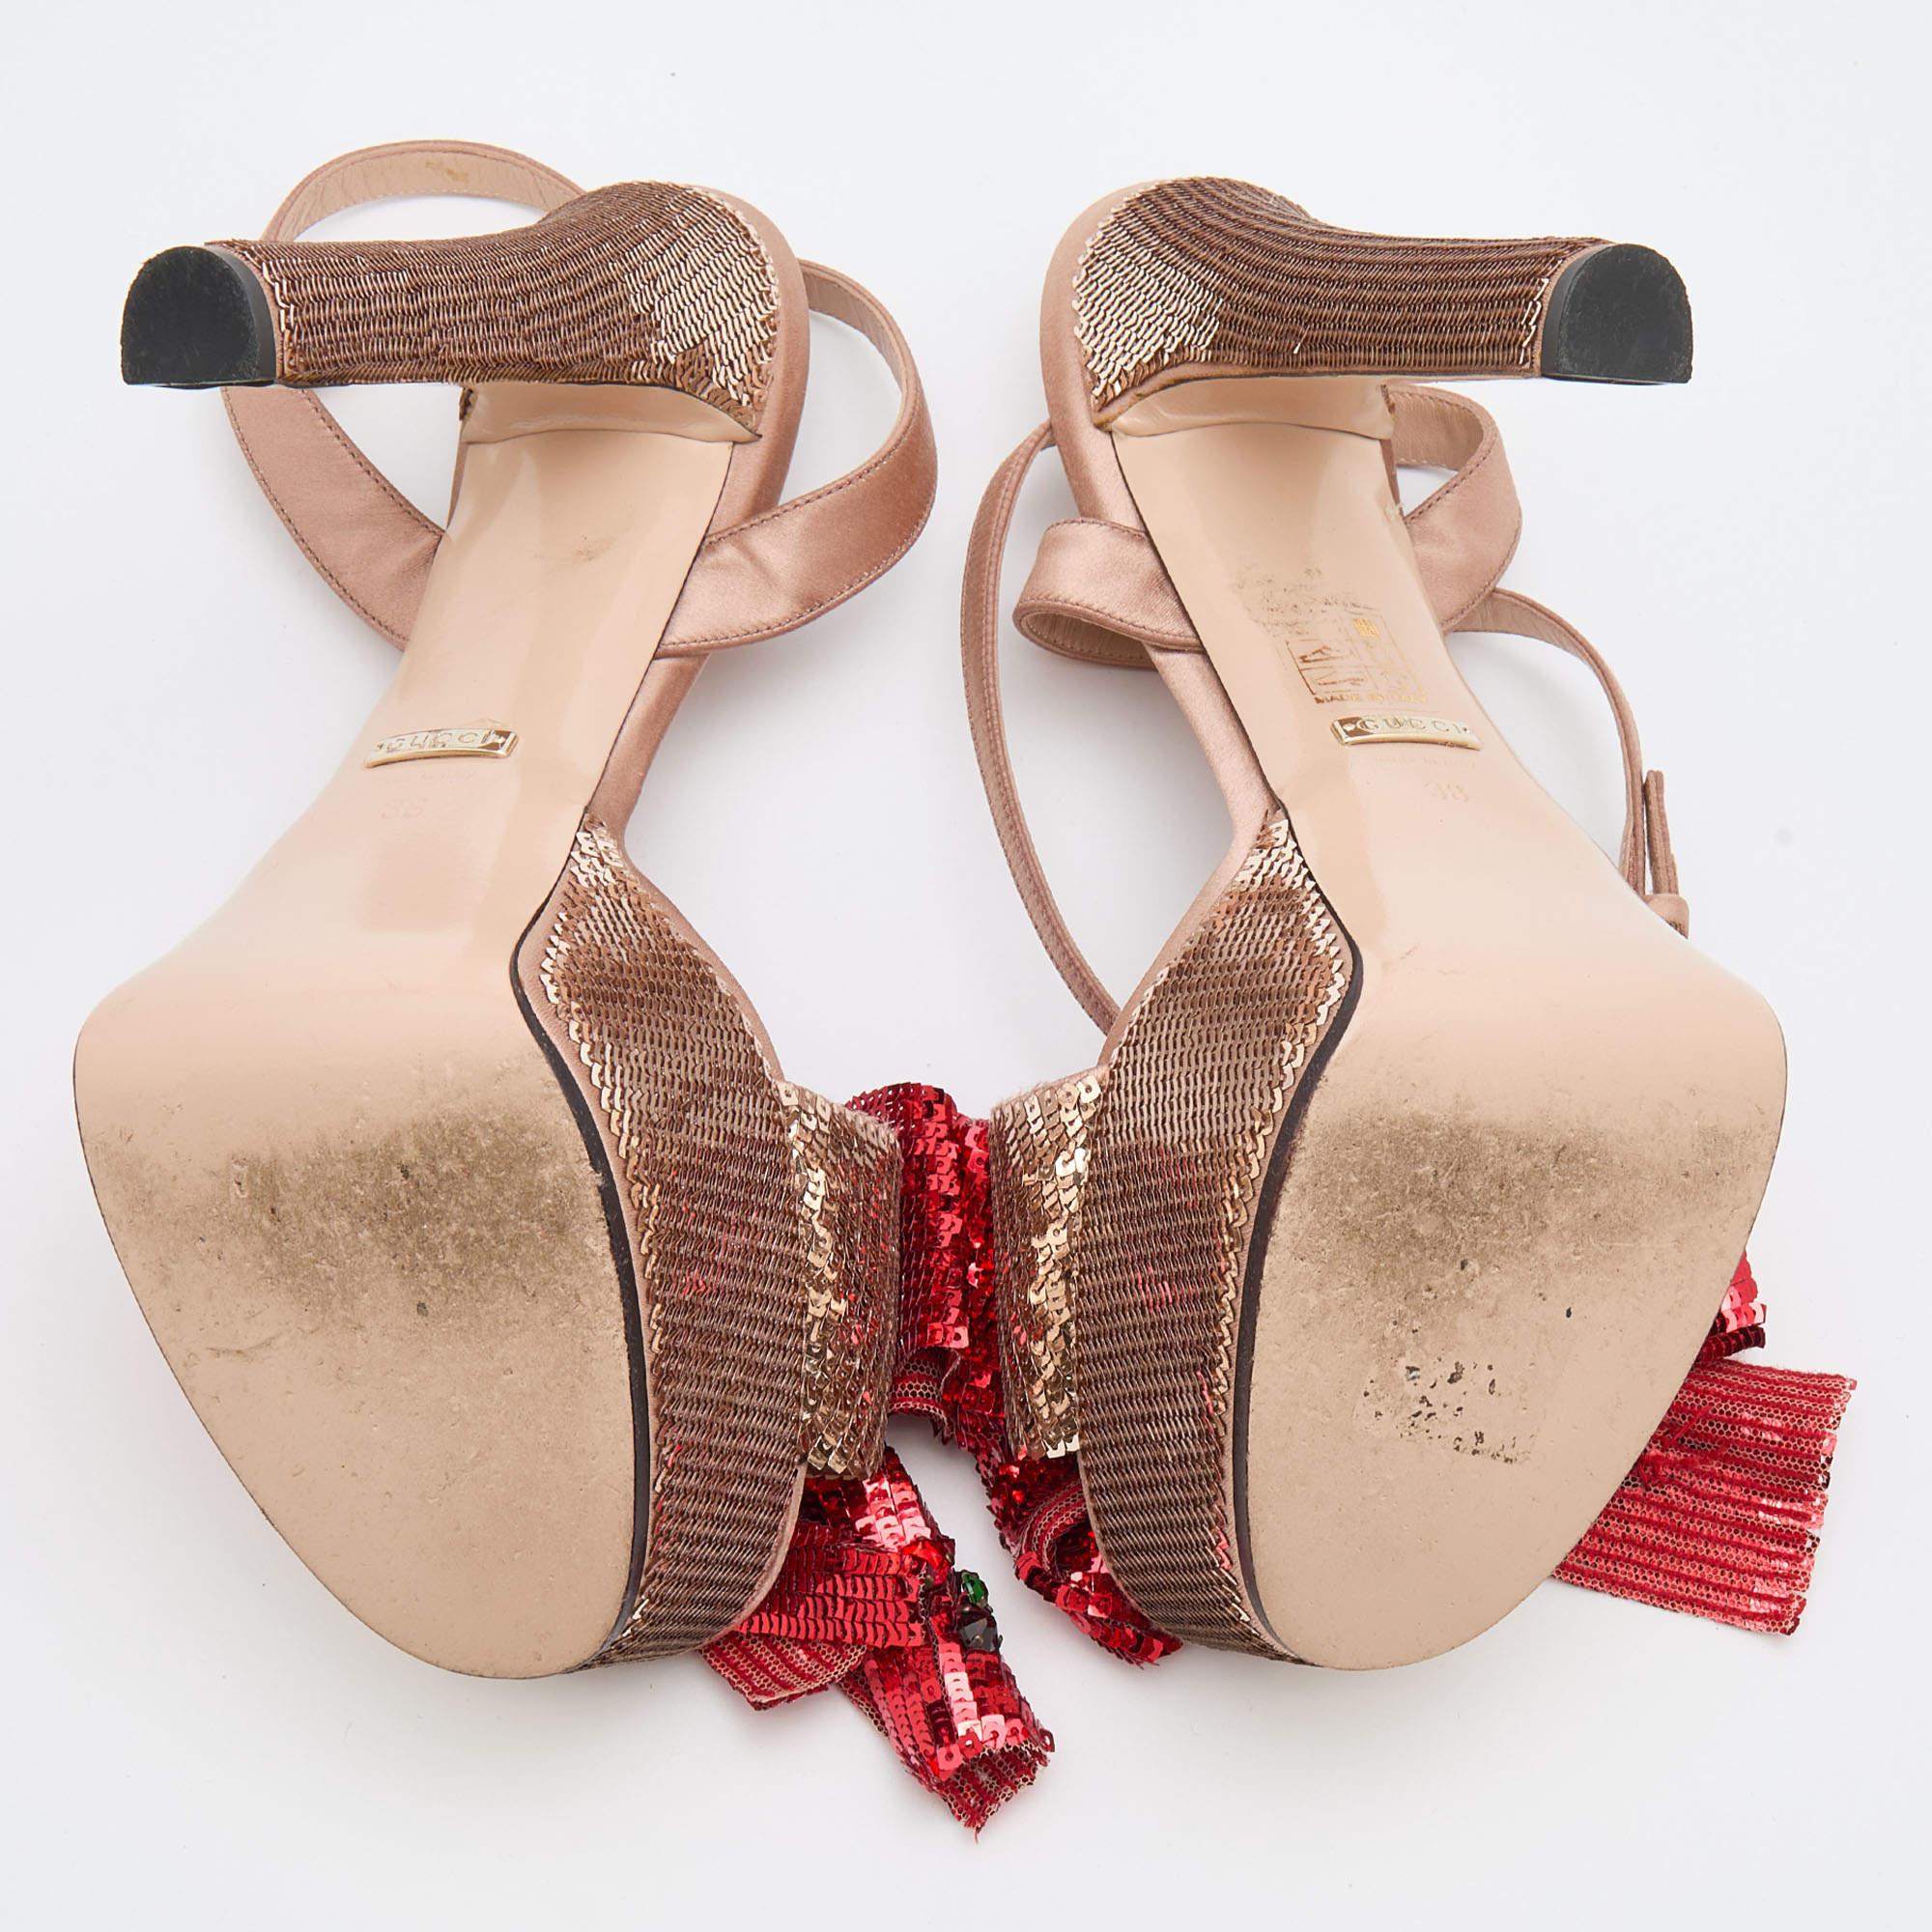 Gucci Beige/Red Sequin and Satin Bow Platform Ankle Strap Sandals Size 38 5